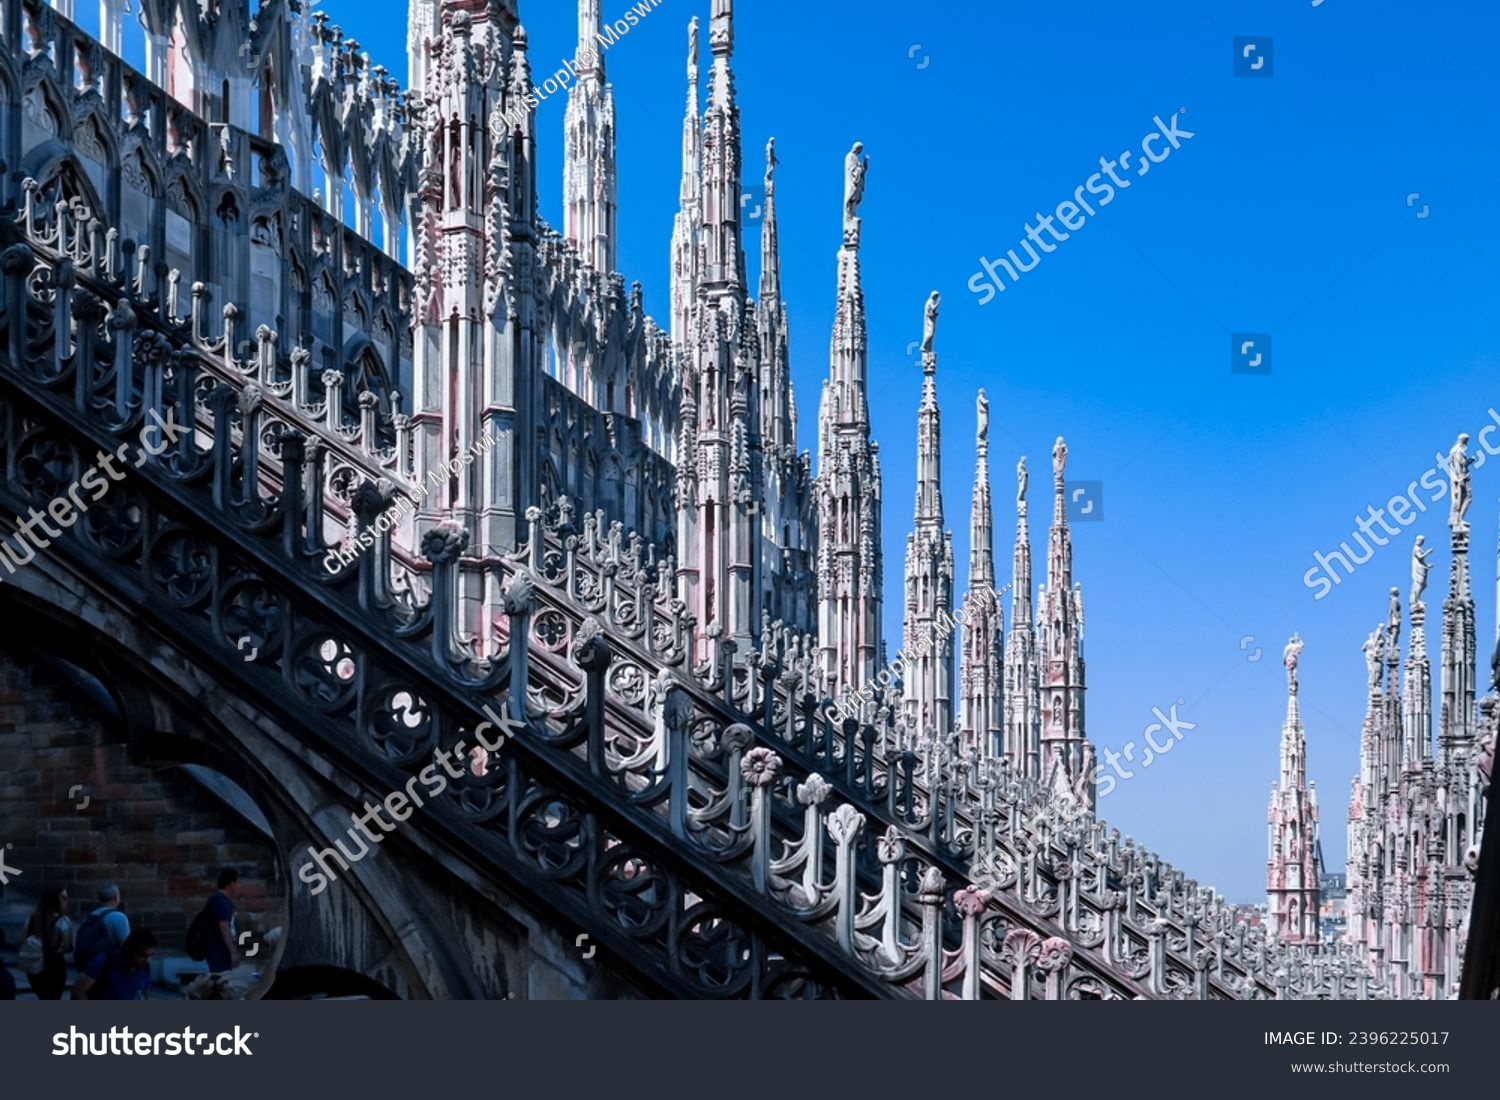 External view of Milan Cathedral (Duomo di Milano) from the rooftop, Milan, Lombardy, Italy, Europe. Historical marble facade with spires. Gothic architecture features. City travel tourism #2396225017